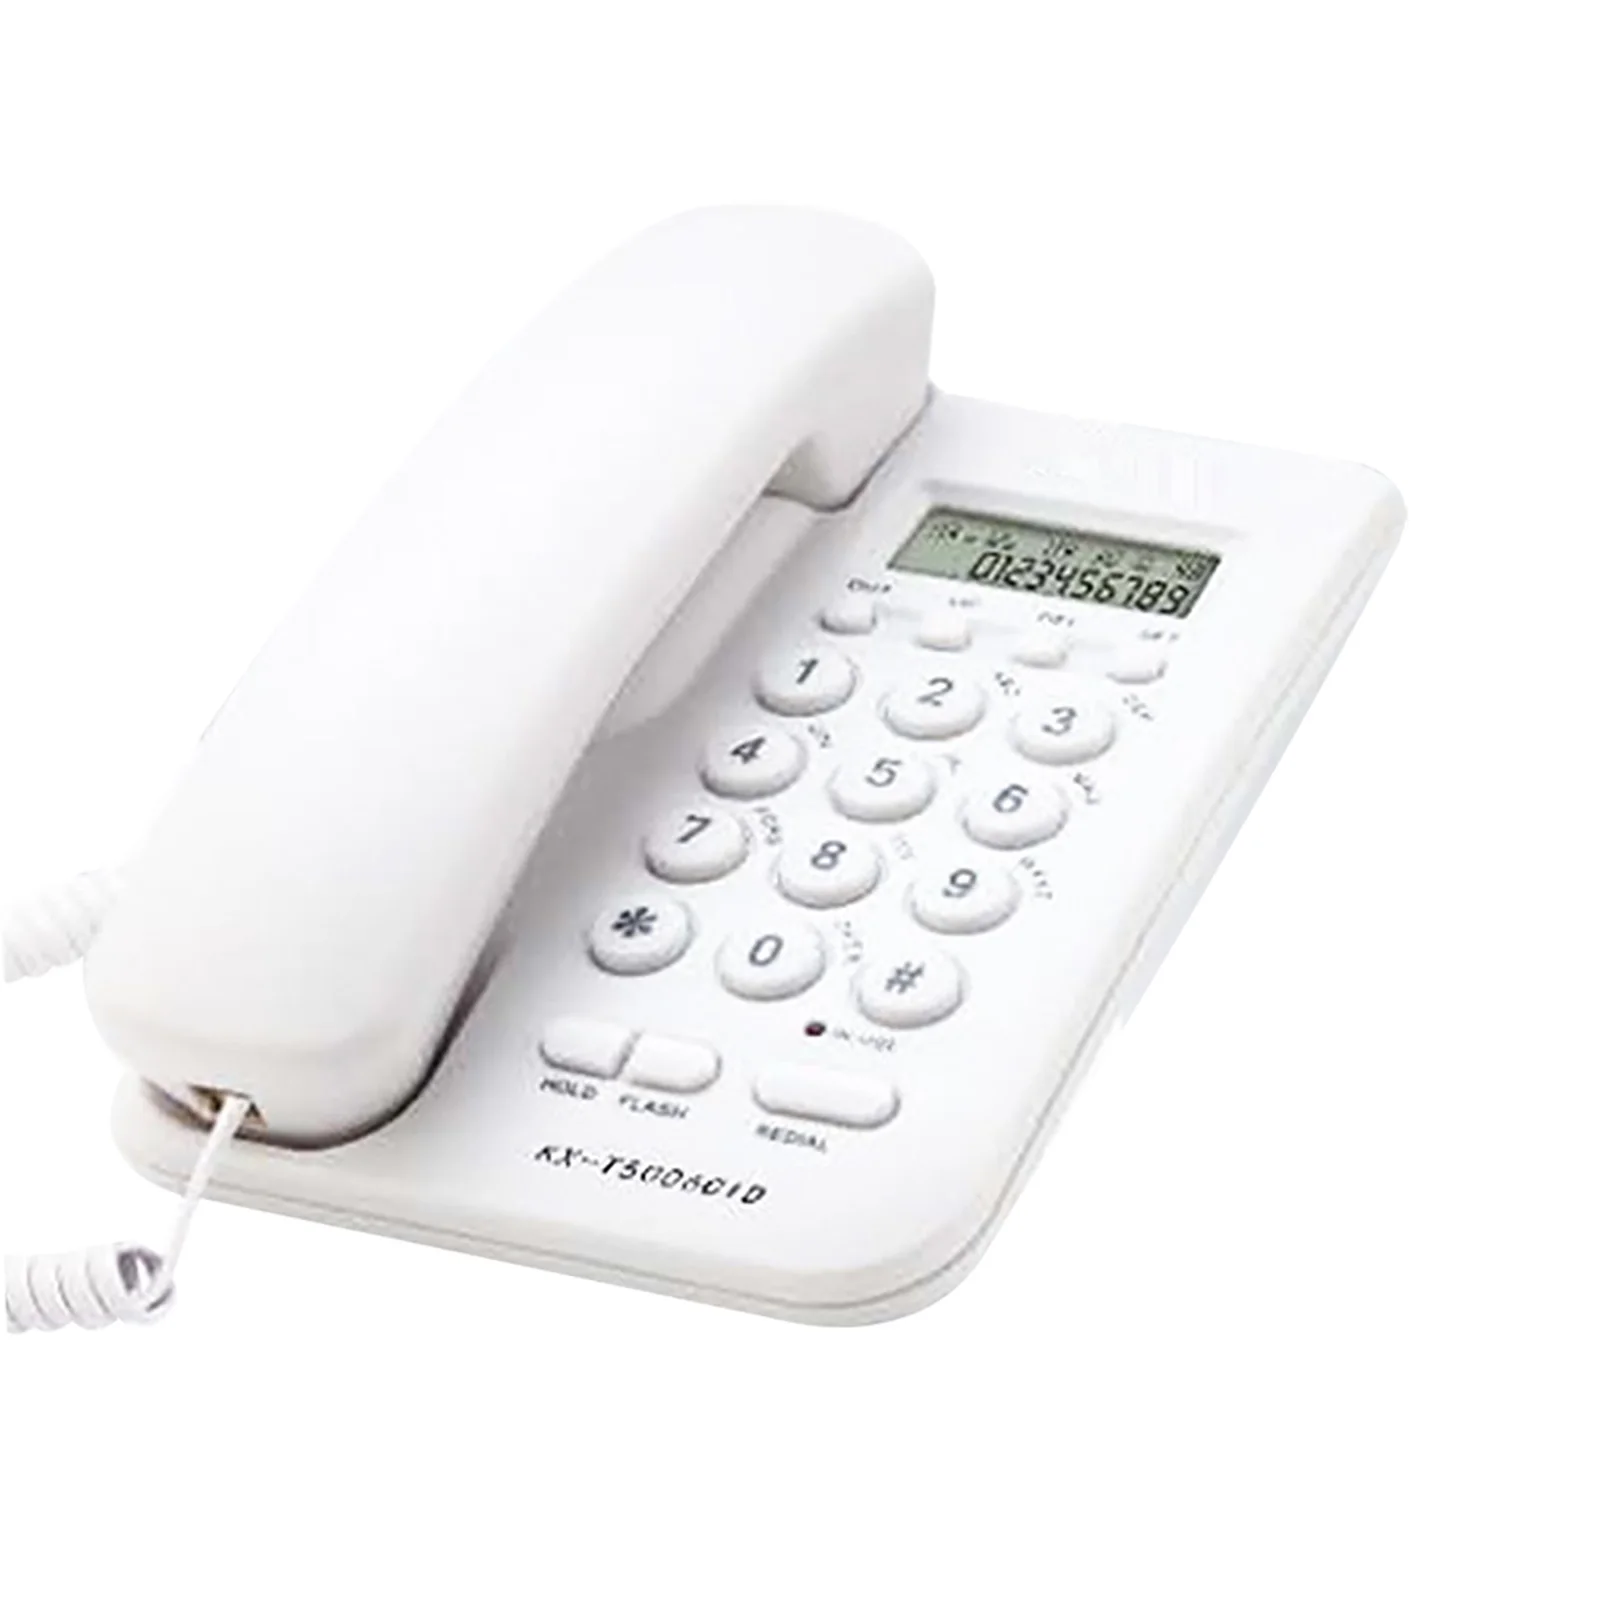 

KX-T5006CID Business Corded Telephone Landline LCD Display Callback Hotel Big Button Loud Sound Wall Mounted Caller ID FSK DTMF